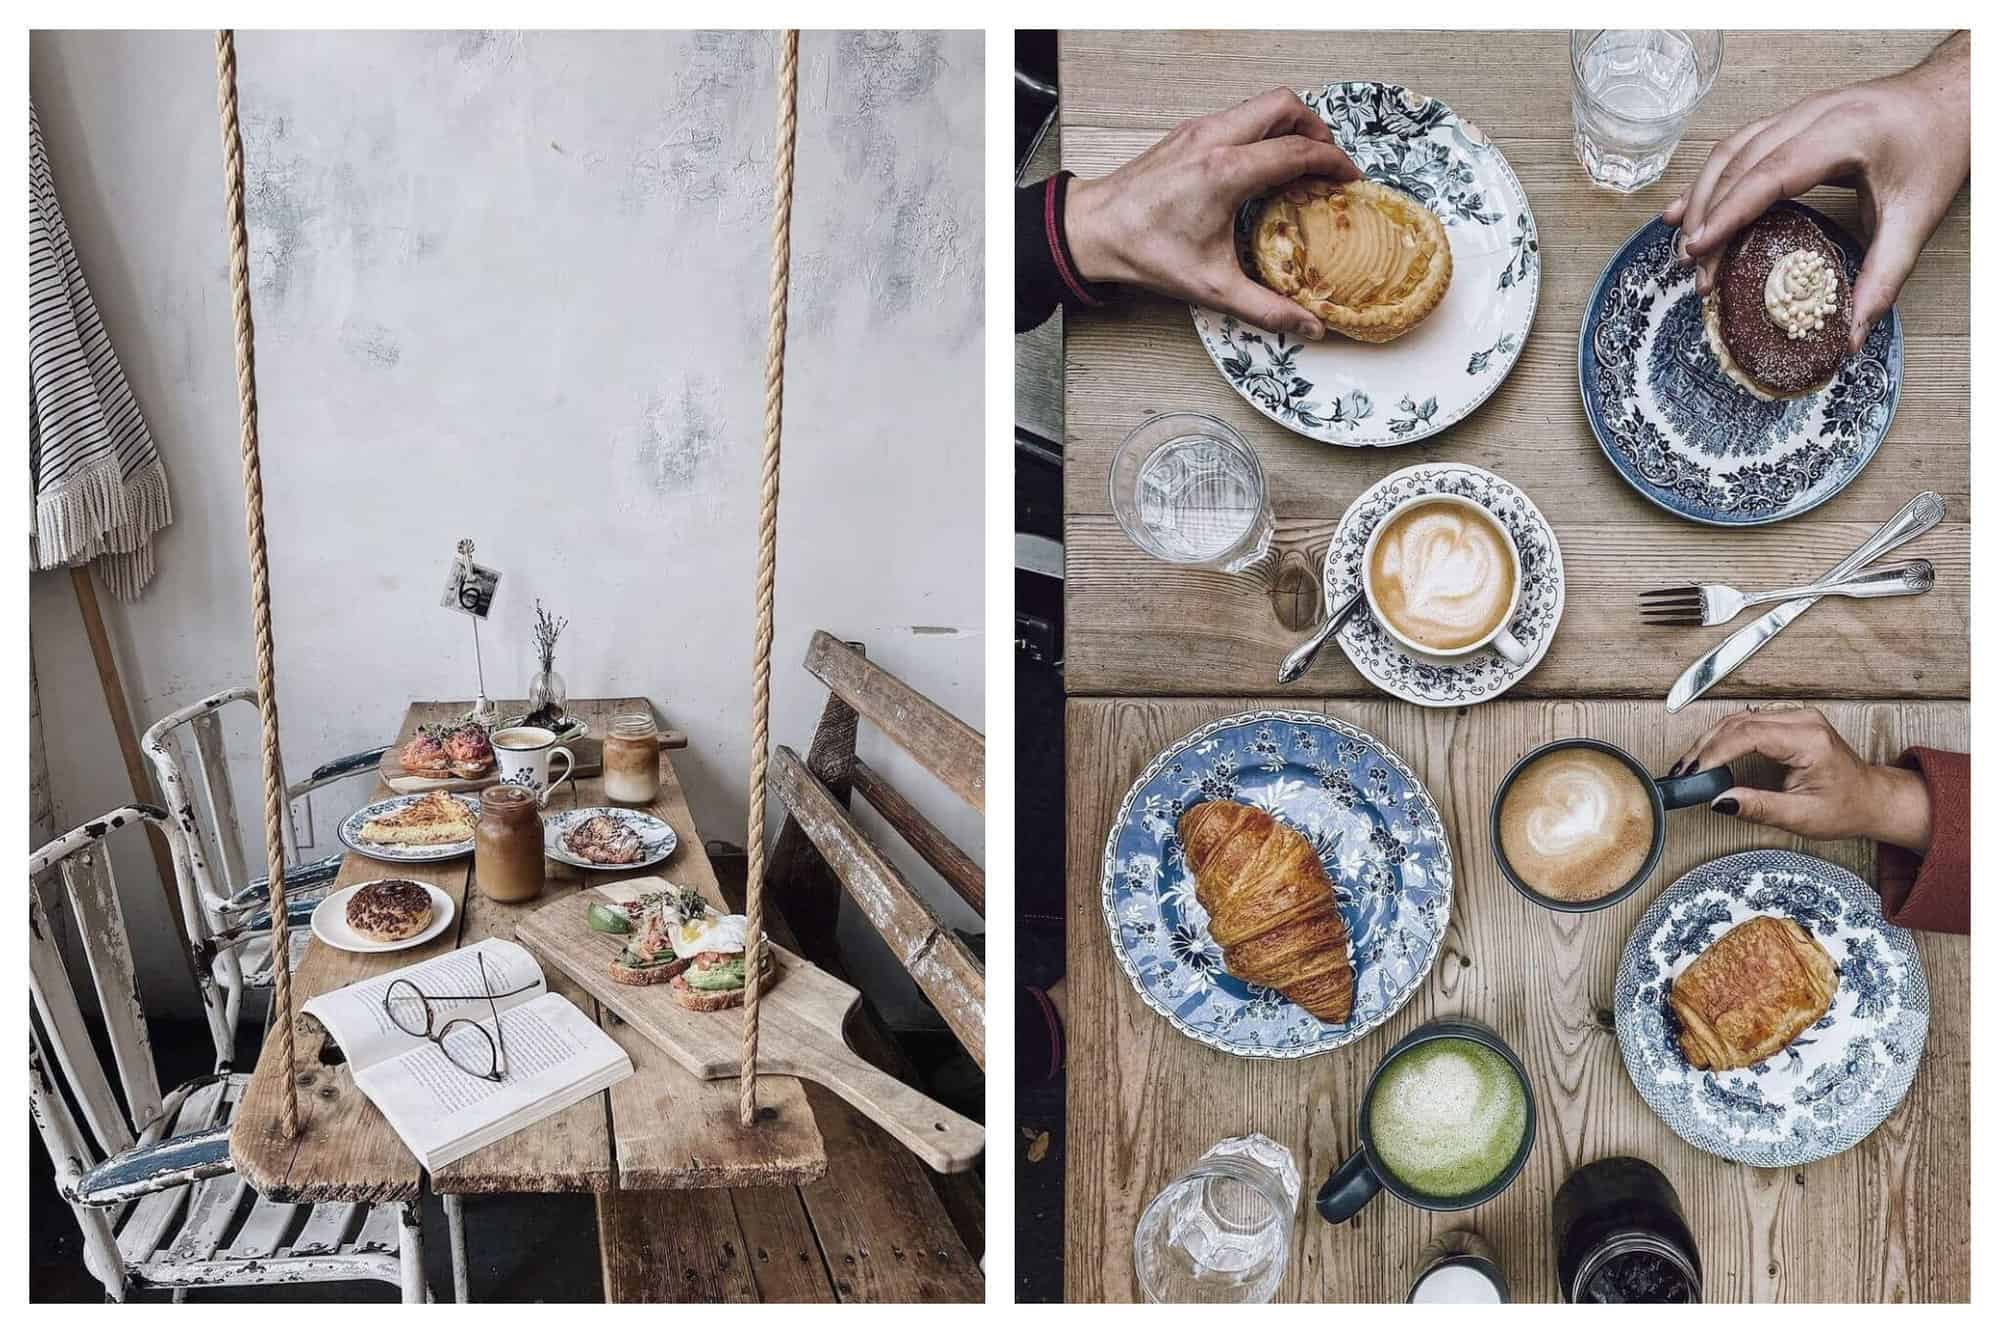 A table suspended by ropes in Maman bakery with brunch laid out on it. Freshly baked pastries and coffee at Maman bakery.